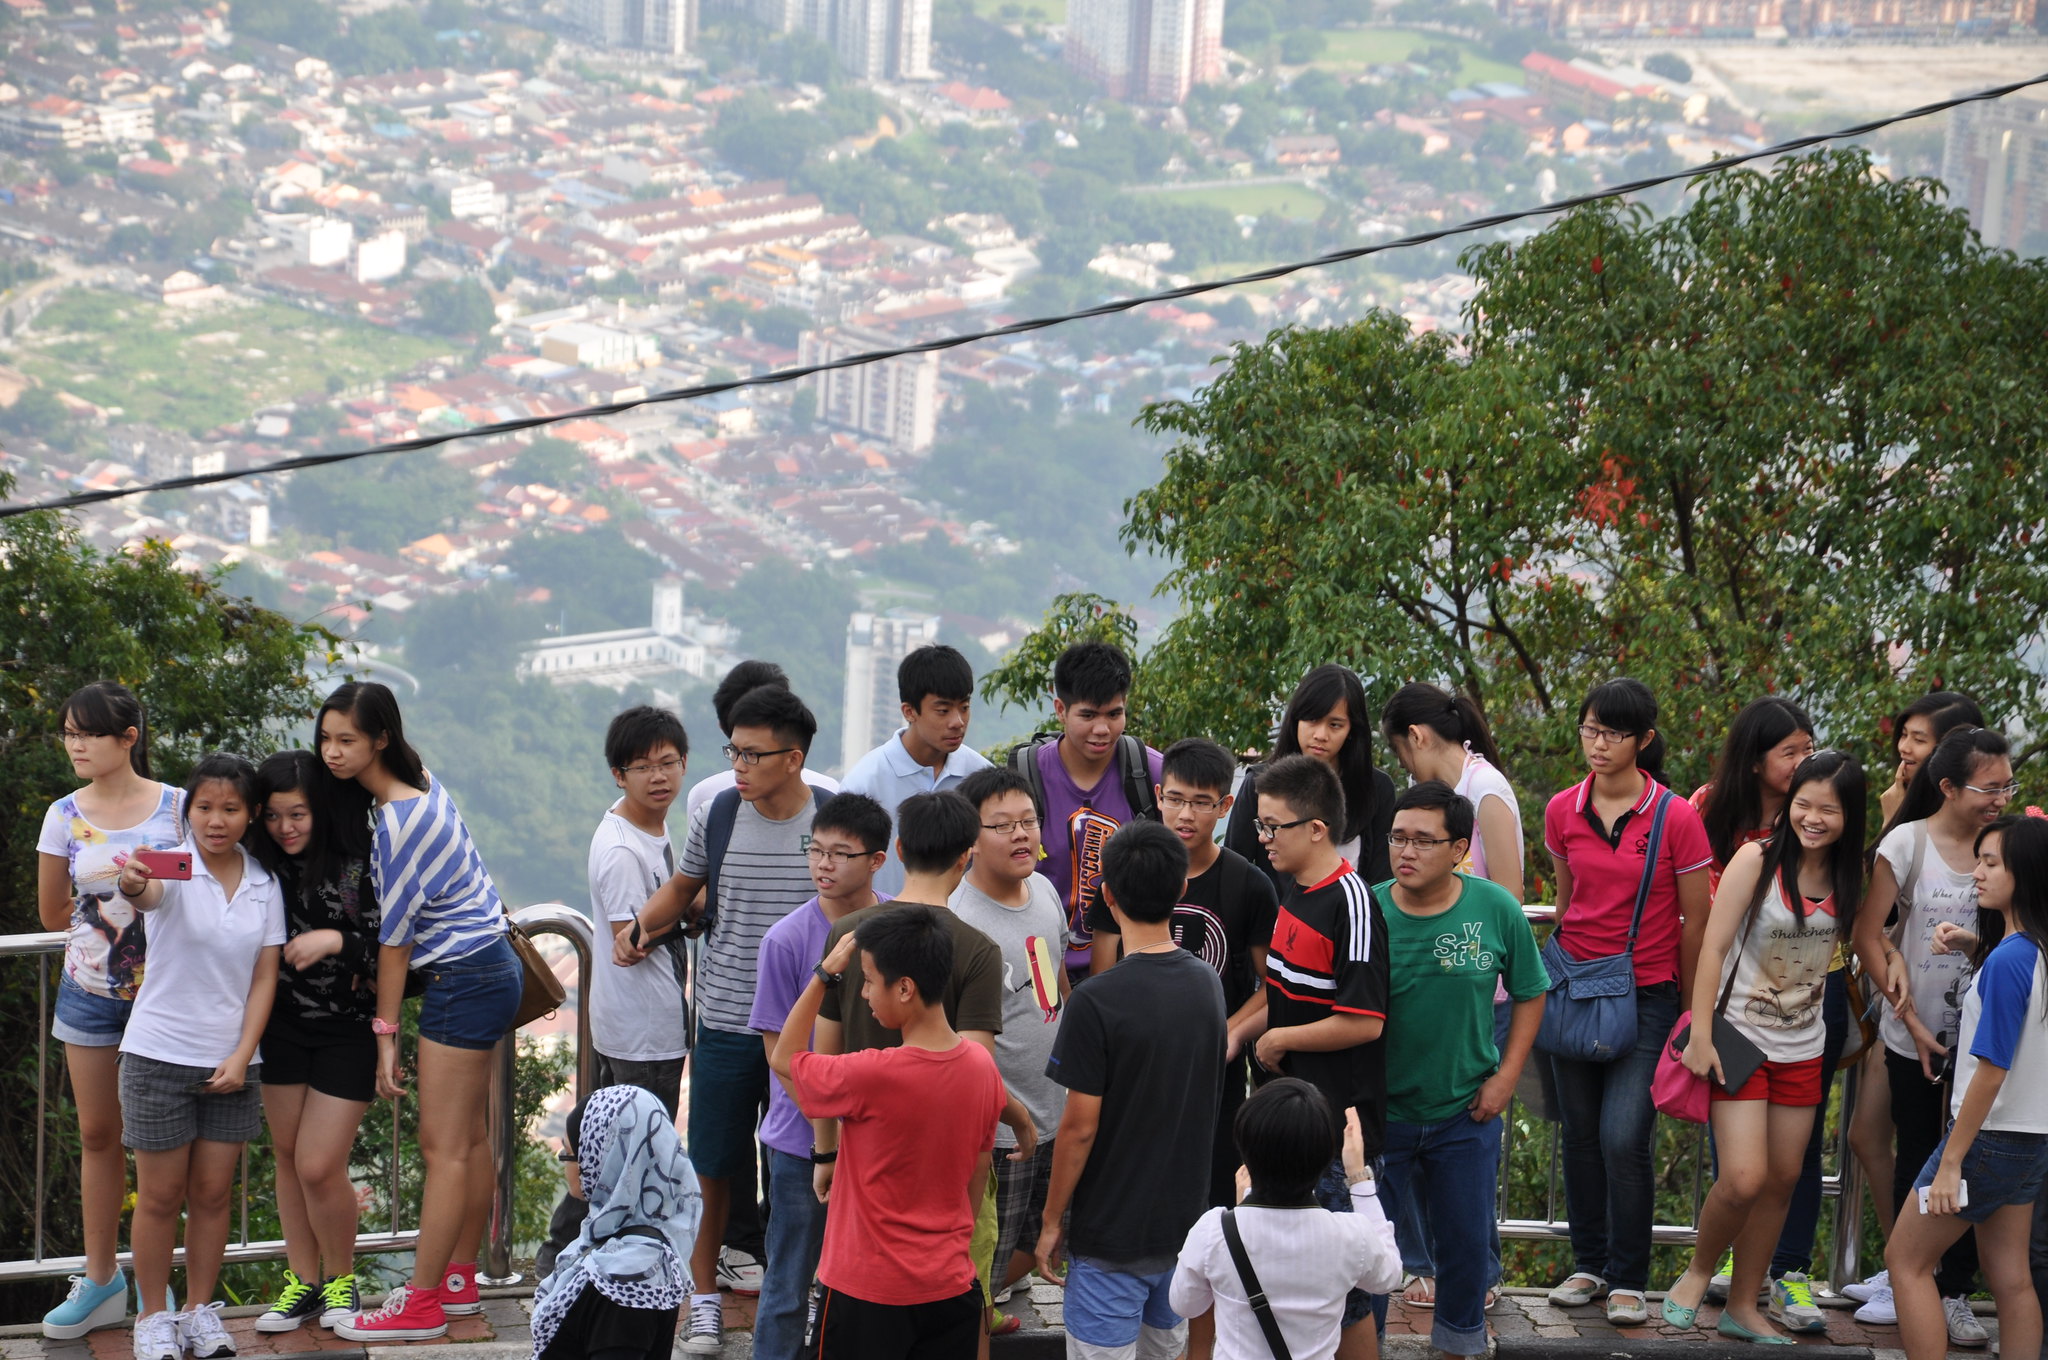 Malaysia has seen an increase in Chinese visitors after having eased visa restrictions 